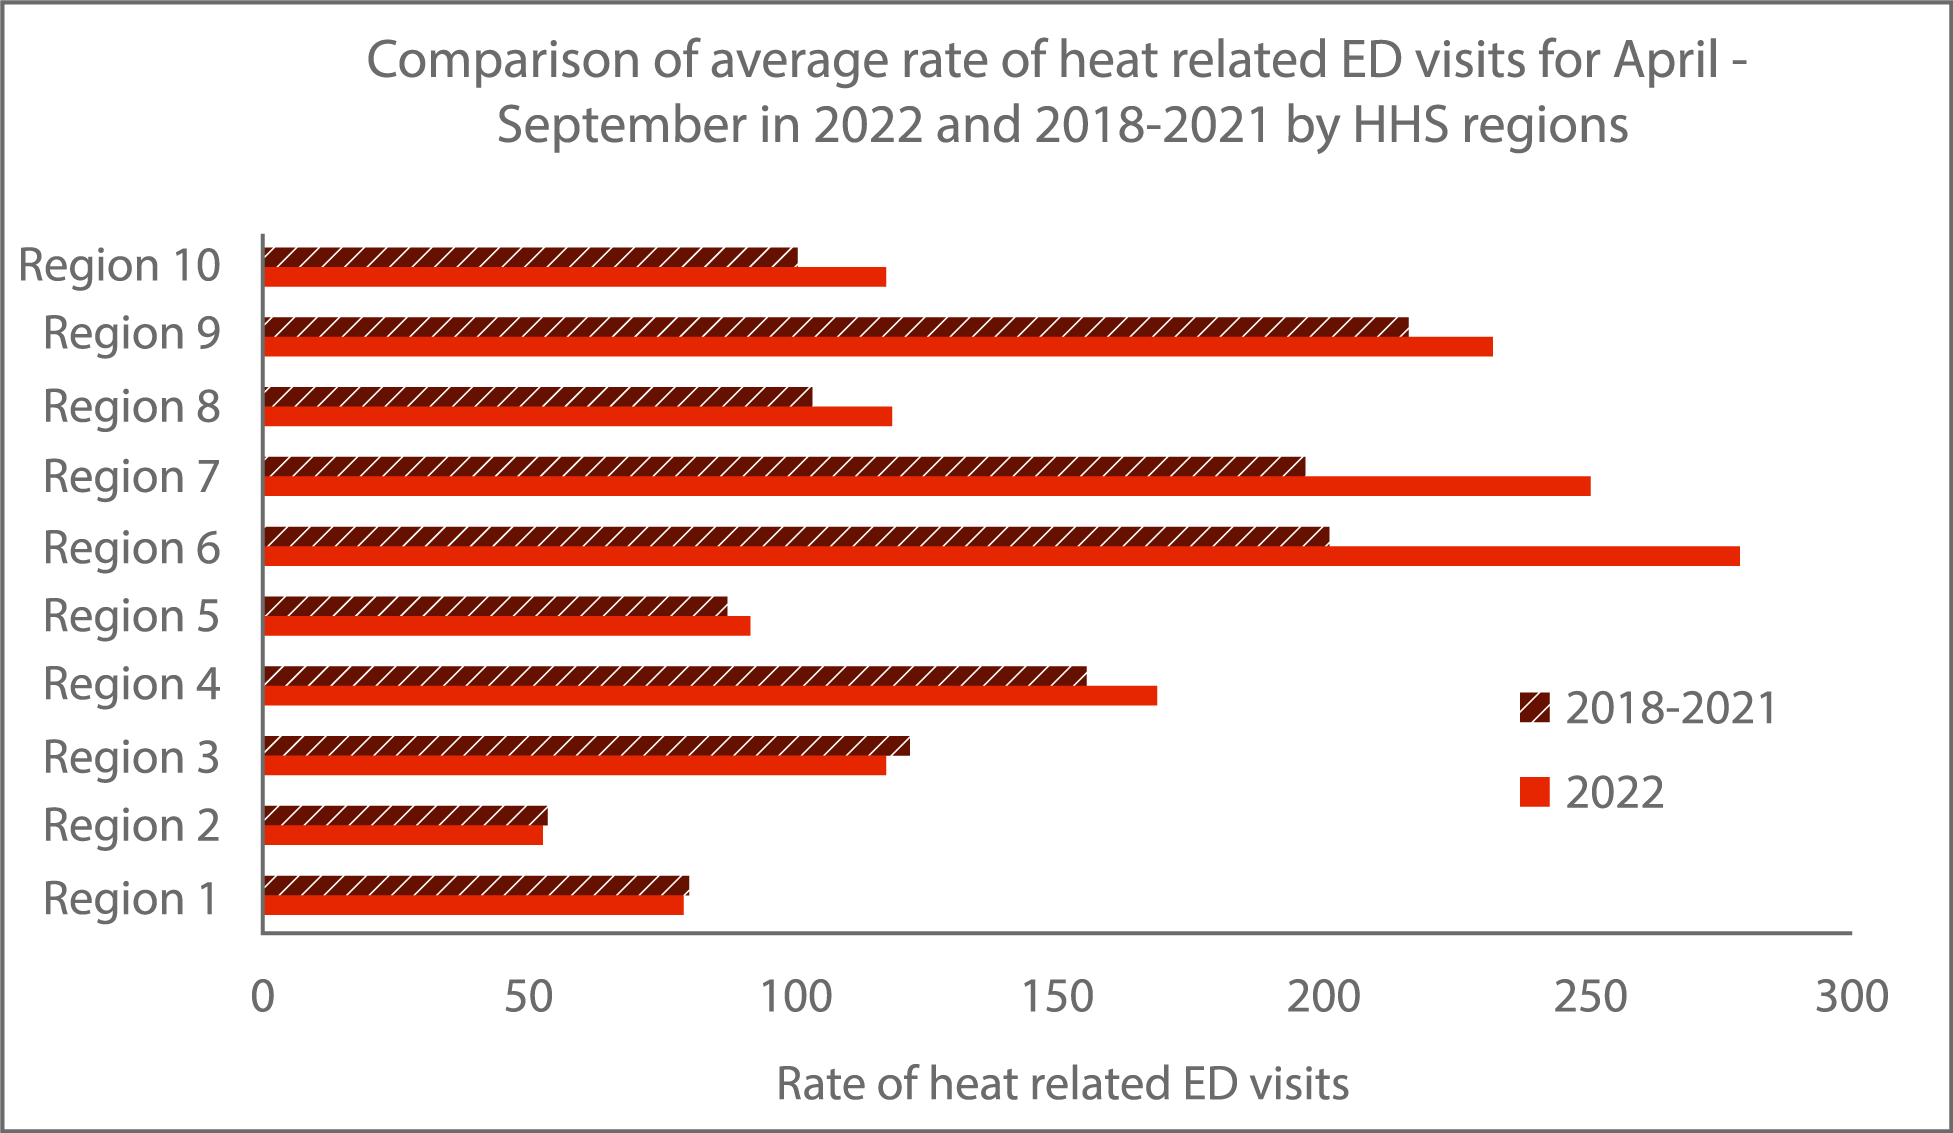 Comparison of average rate of heat related ED visits for April - September in 2022 and 2018-2021 by HHS regions